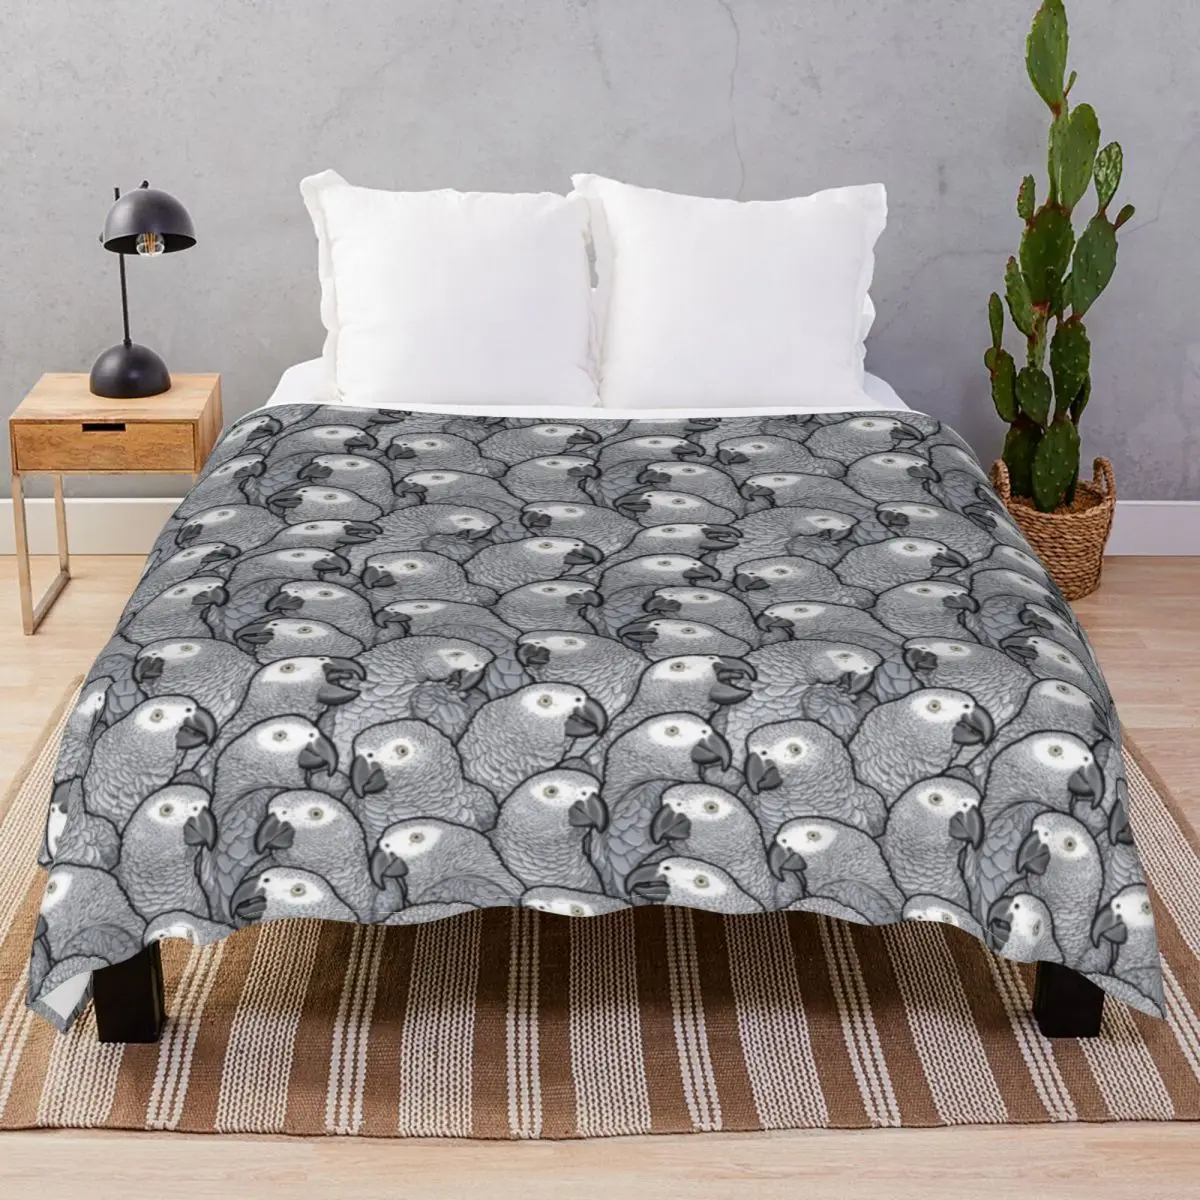 African Grey Parrots Blanket Fleece Decoration Multifunction Throw Blankets for Bedding Home Couch Travel Cinema